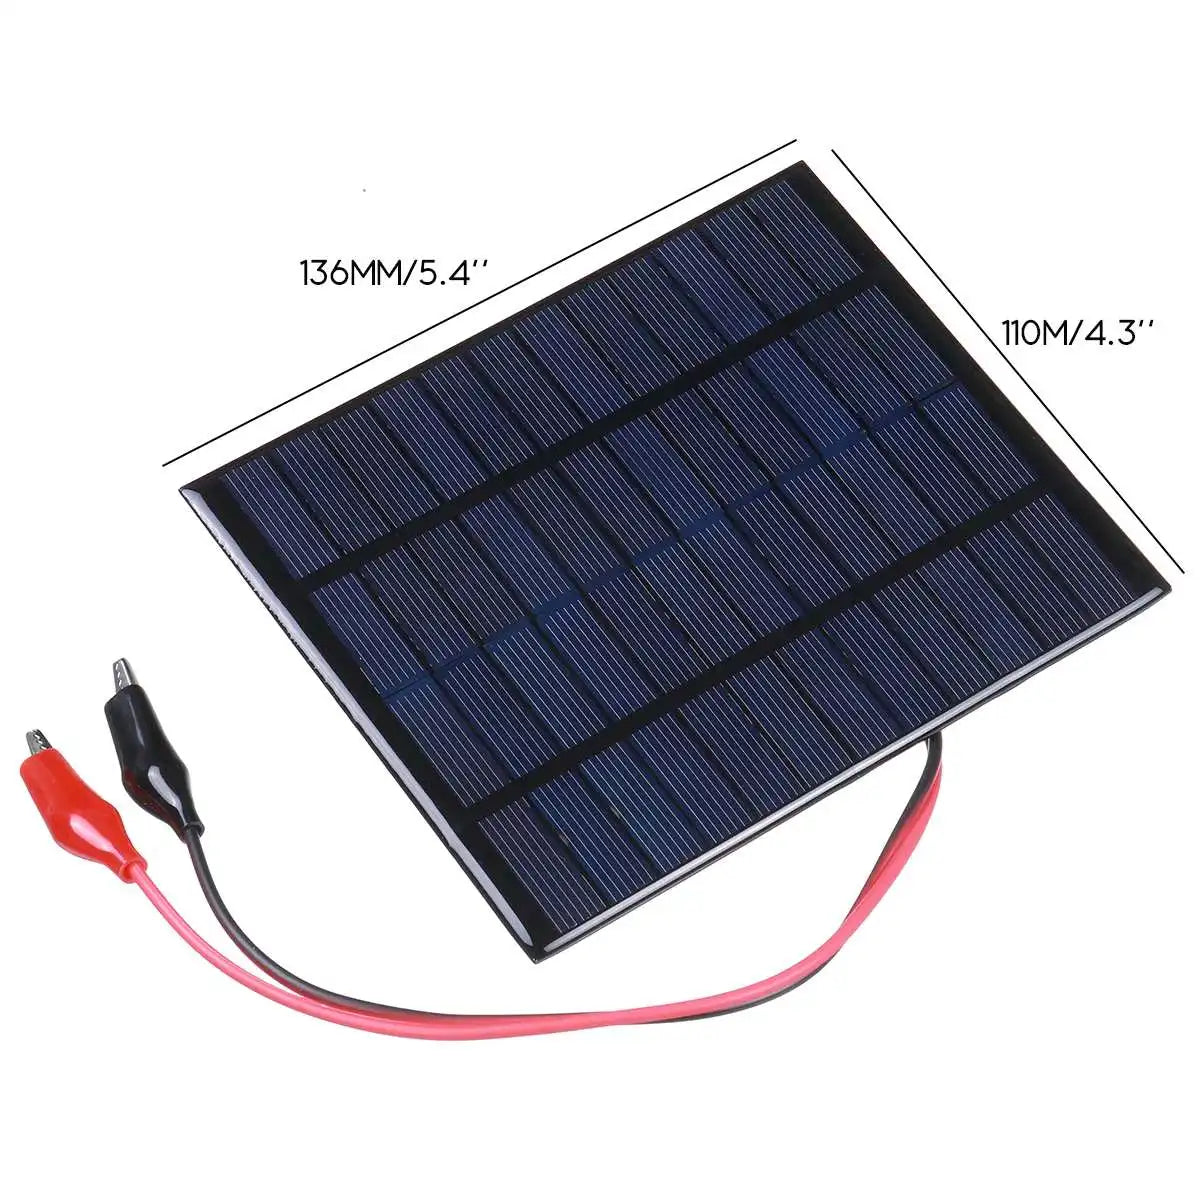 20W Solar Panel, High-efficiency solar panels generate free electricity from sunlight.